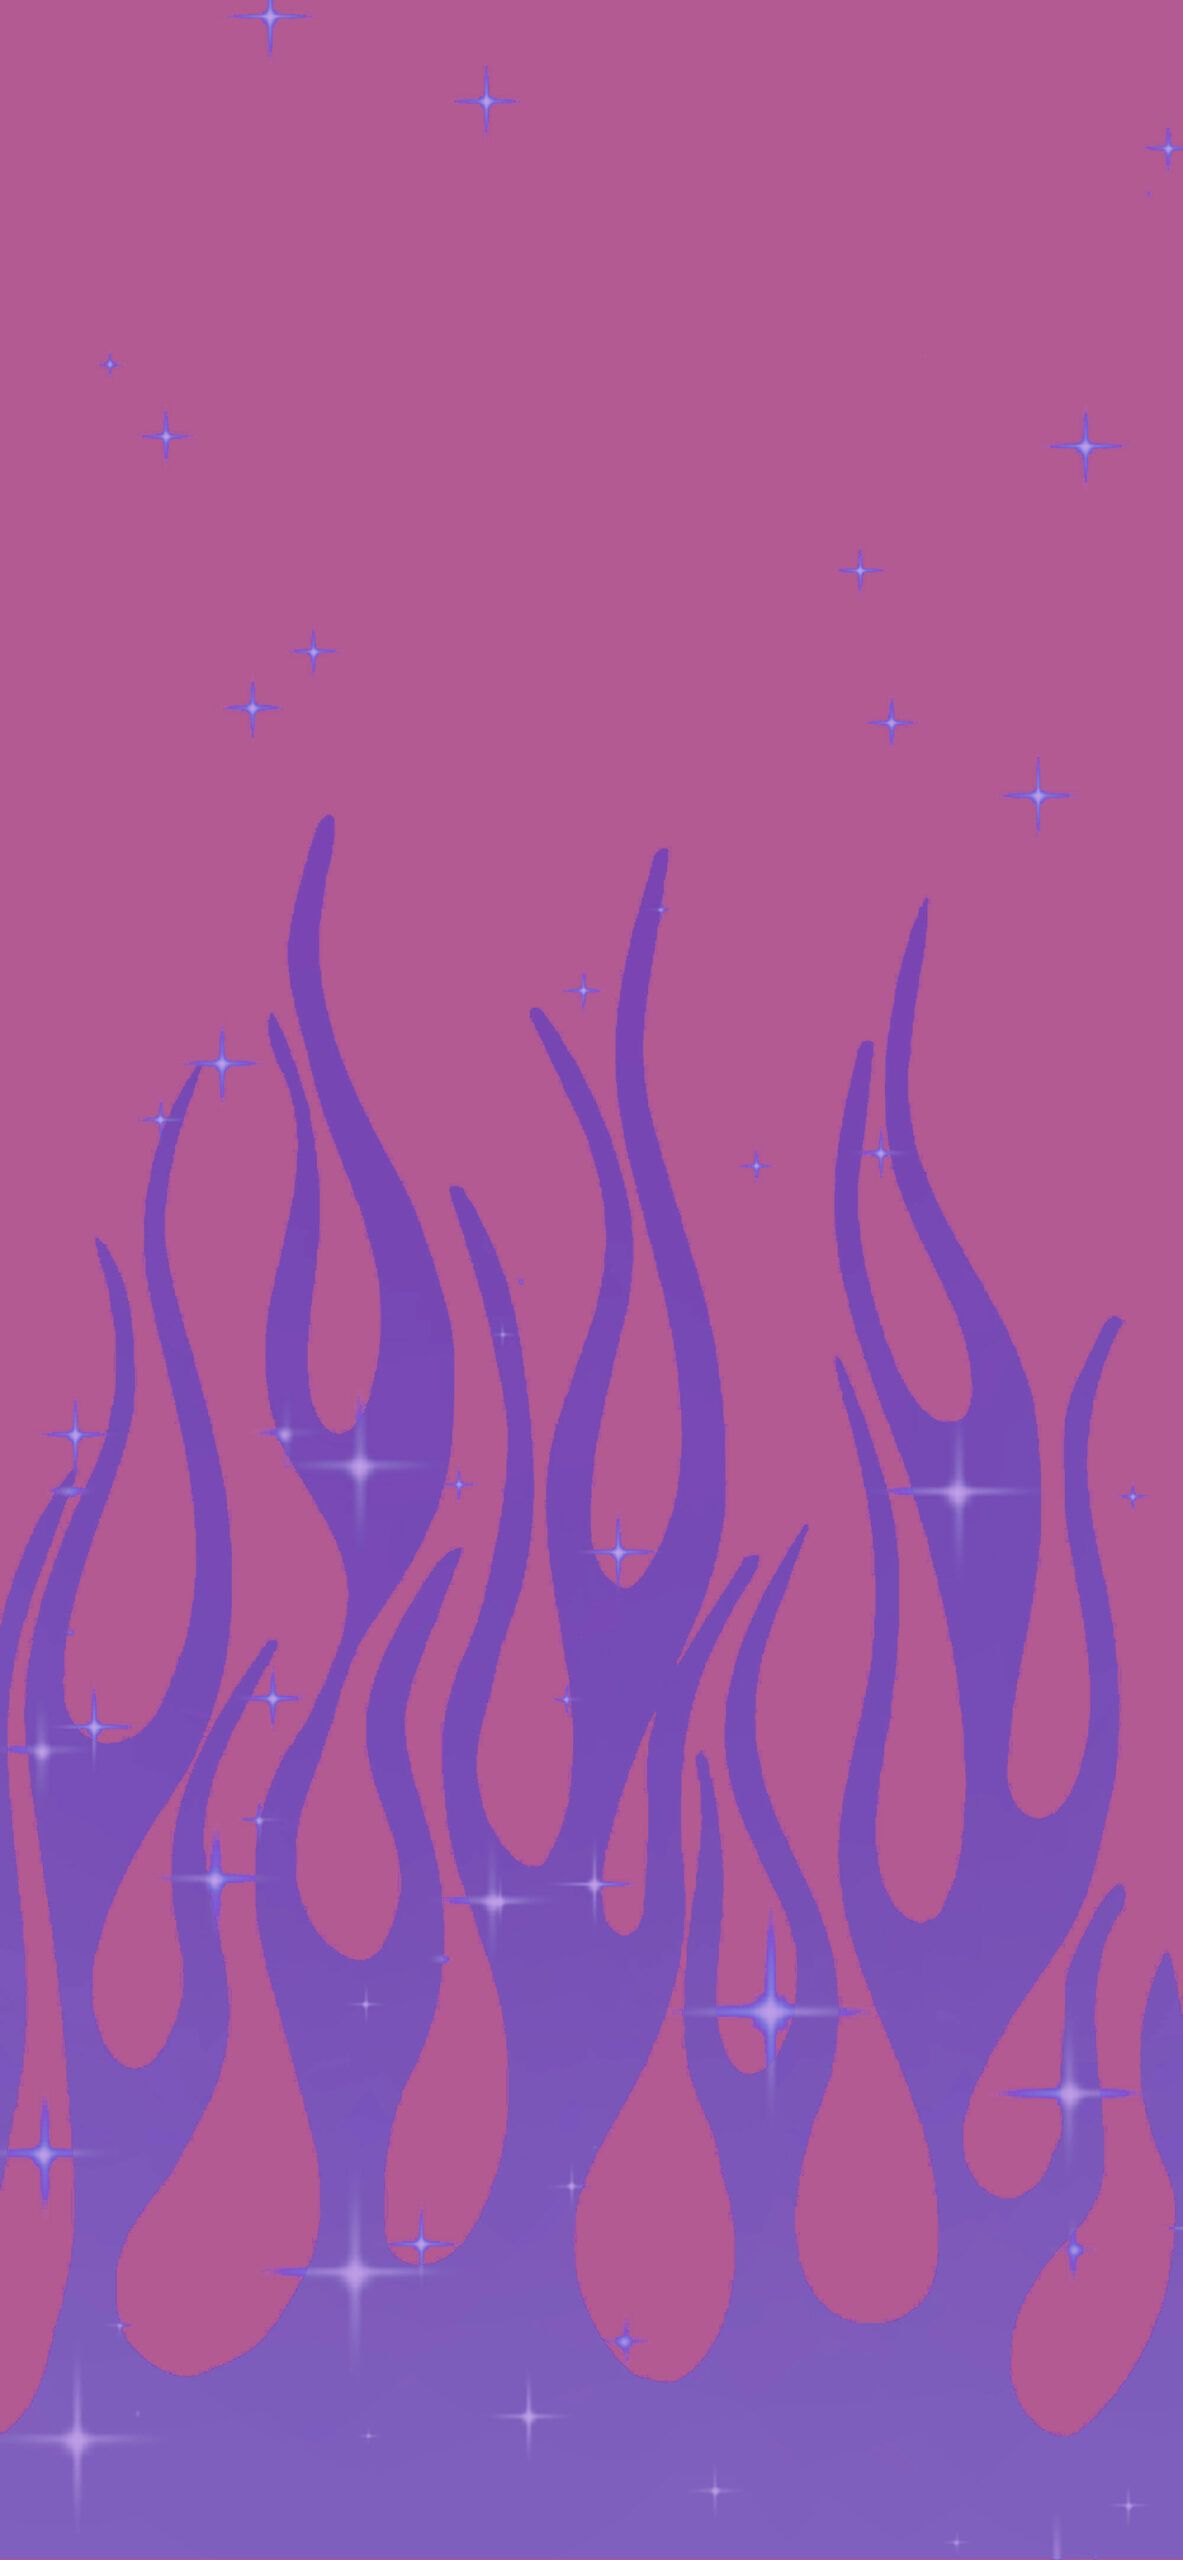 Fire flames on a pink background - Fire